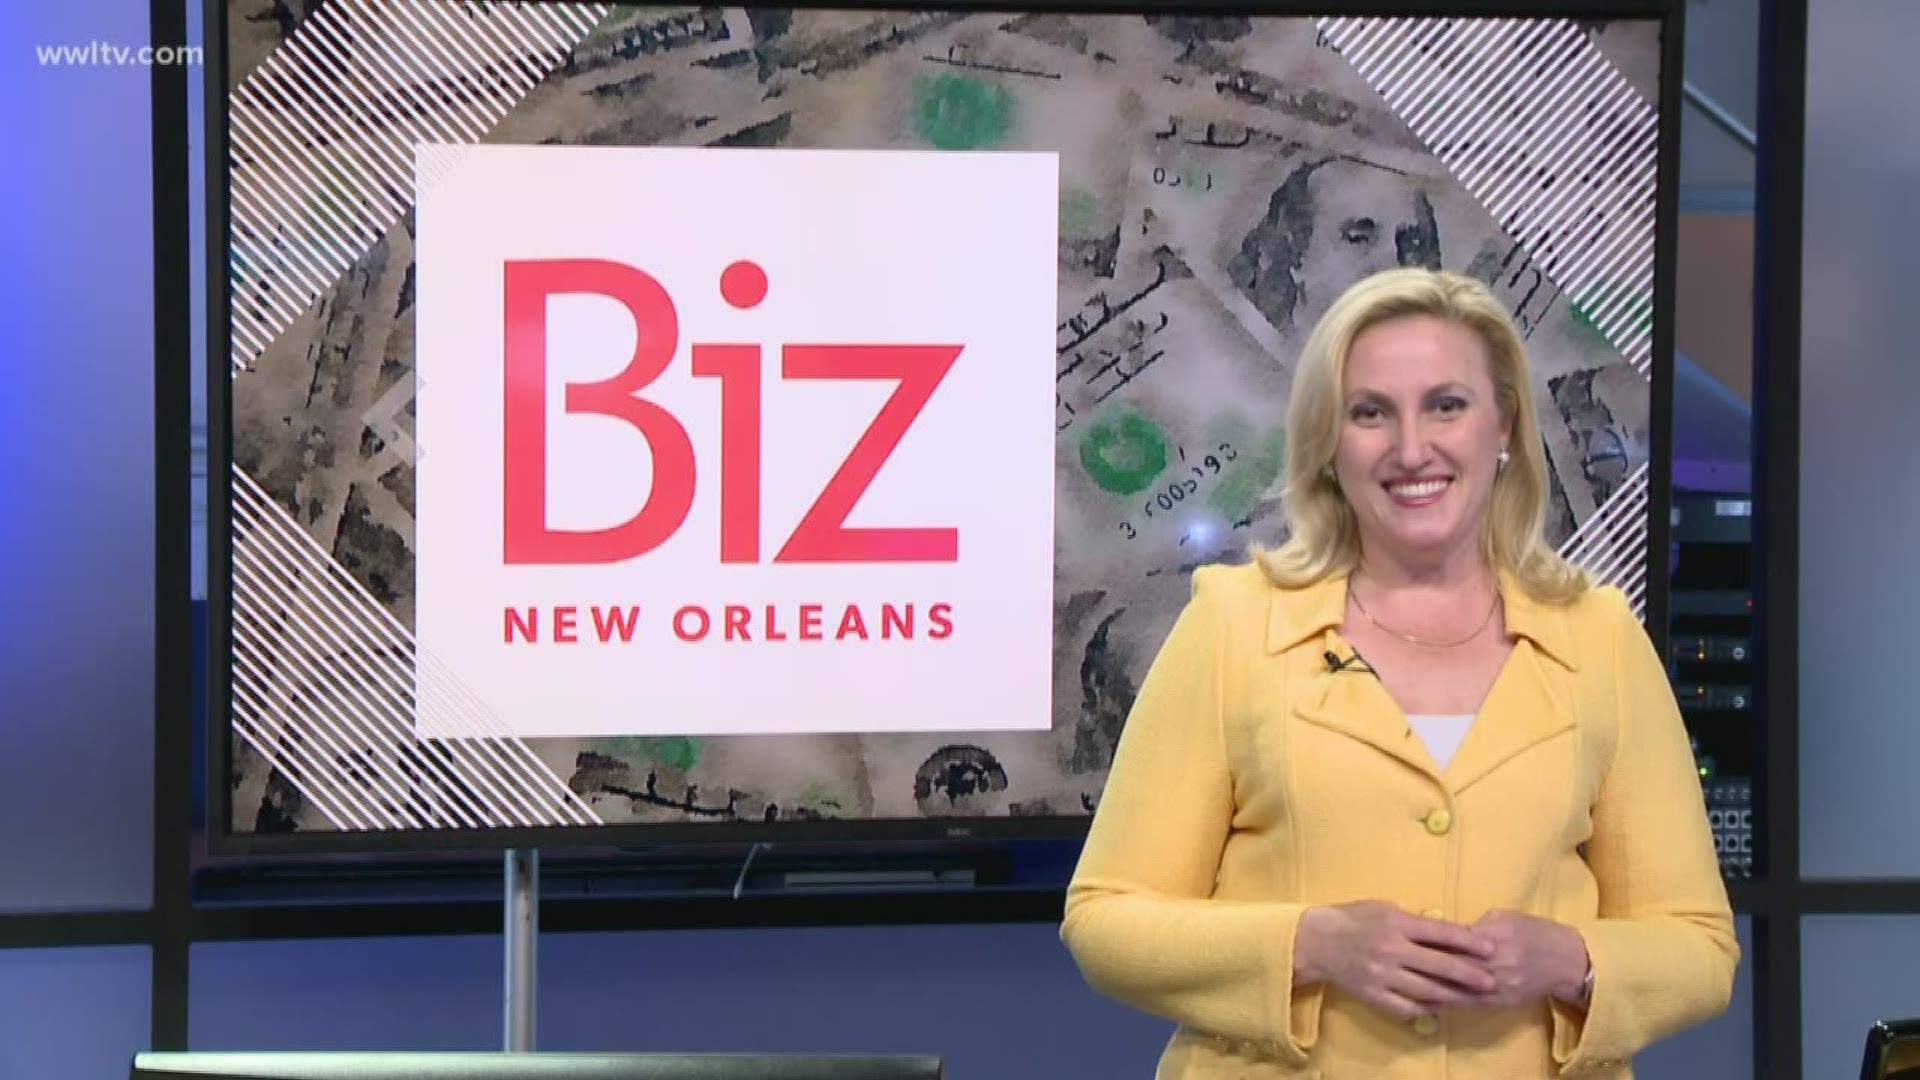 A big change that kicked in last month affects the way employer identification numbers, or E-I-Ns, are issued. BizNewOrleans.com's Leslie Snadowsky tells what you need to know about the new requirement that applies to any business seeking a tax ID number.